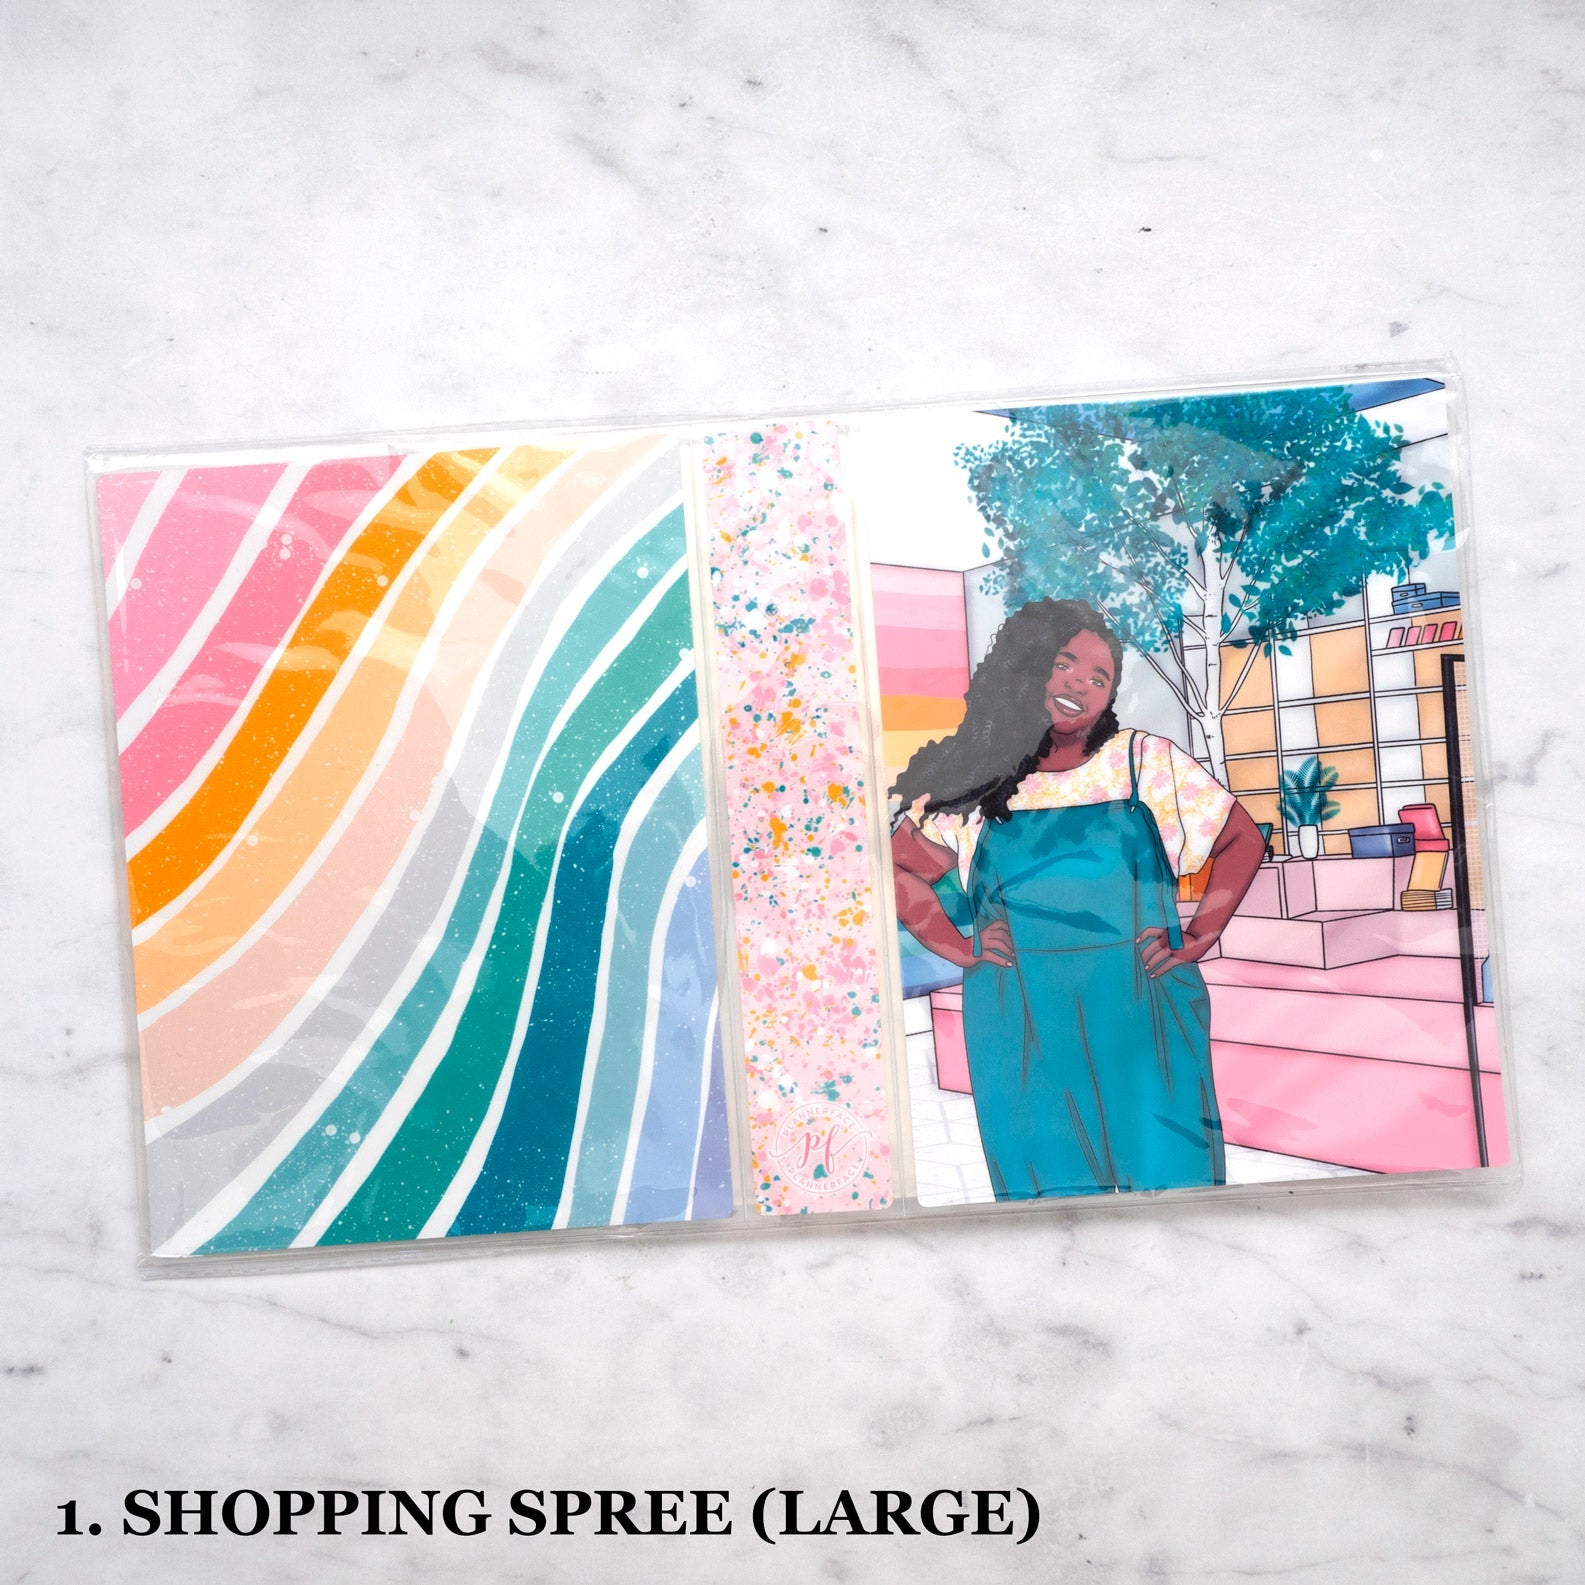 Sticker Albums (Last Chance Designs, Mixed Sizes)